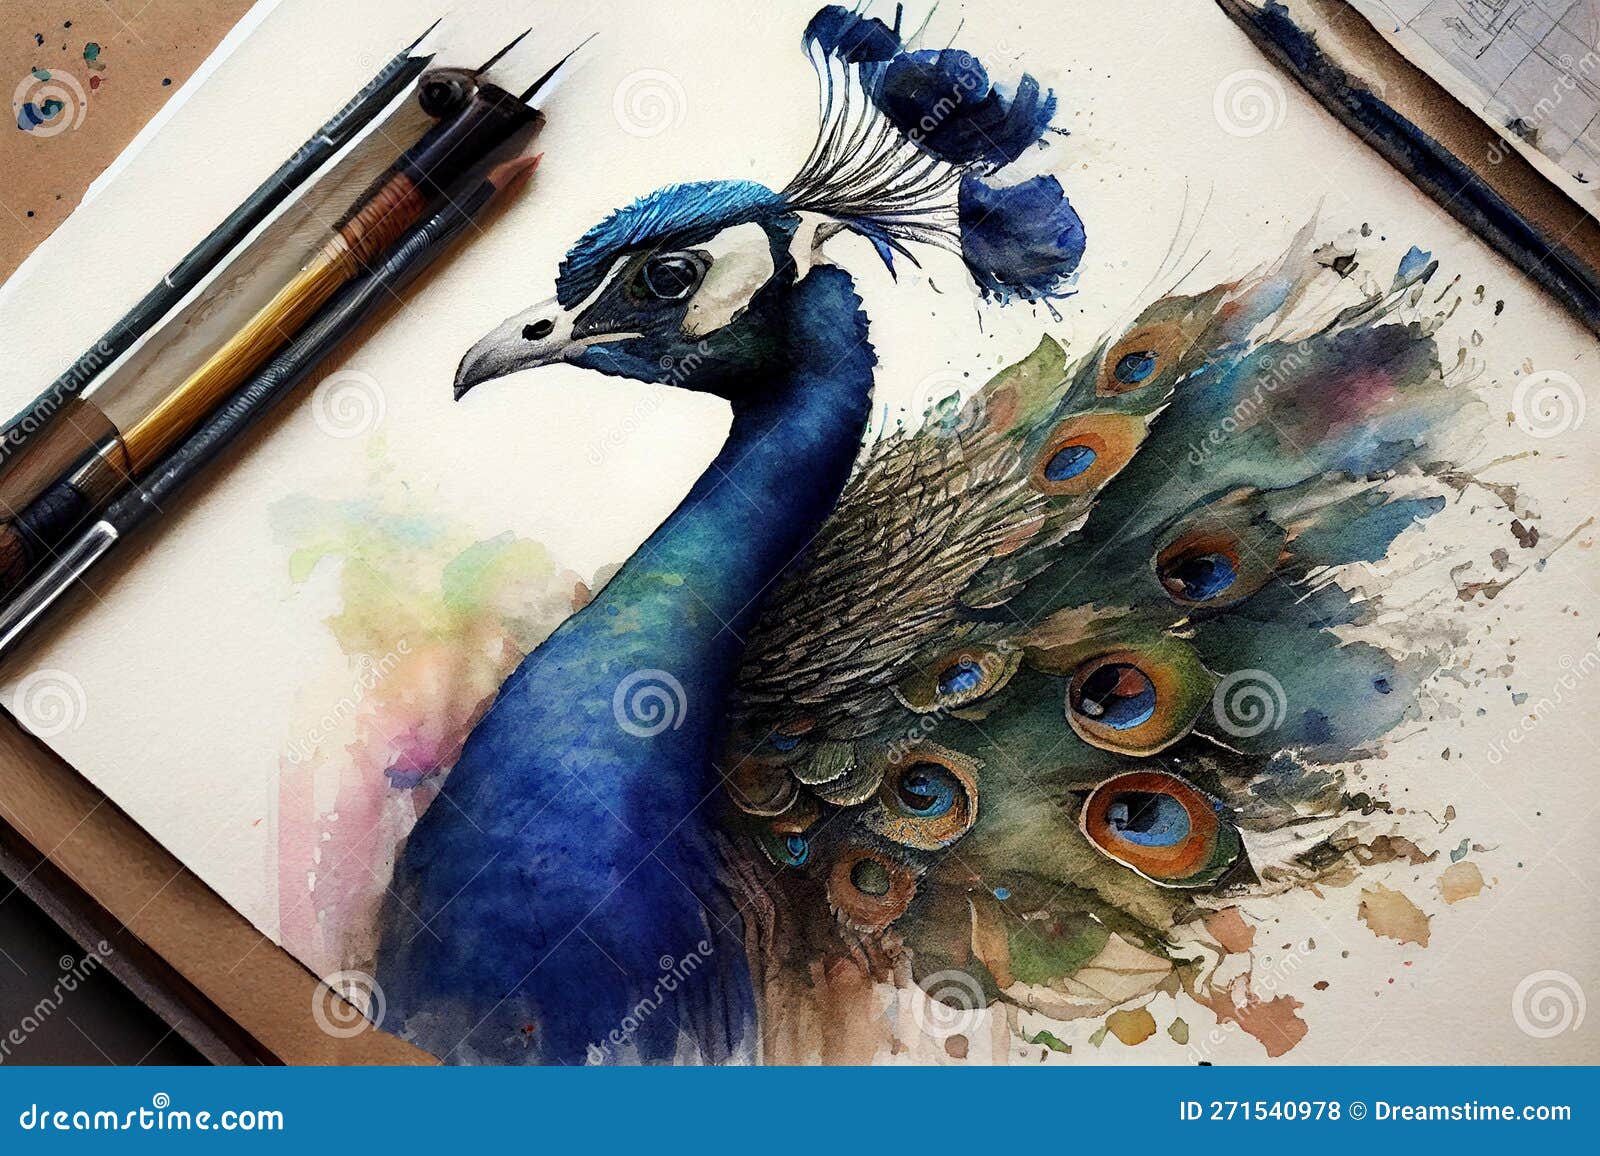 Realistic Peacock Drawing with Detailed Floral Elements Stock Illustration  - Illustration of floral, religion: 295548605